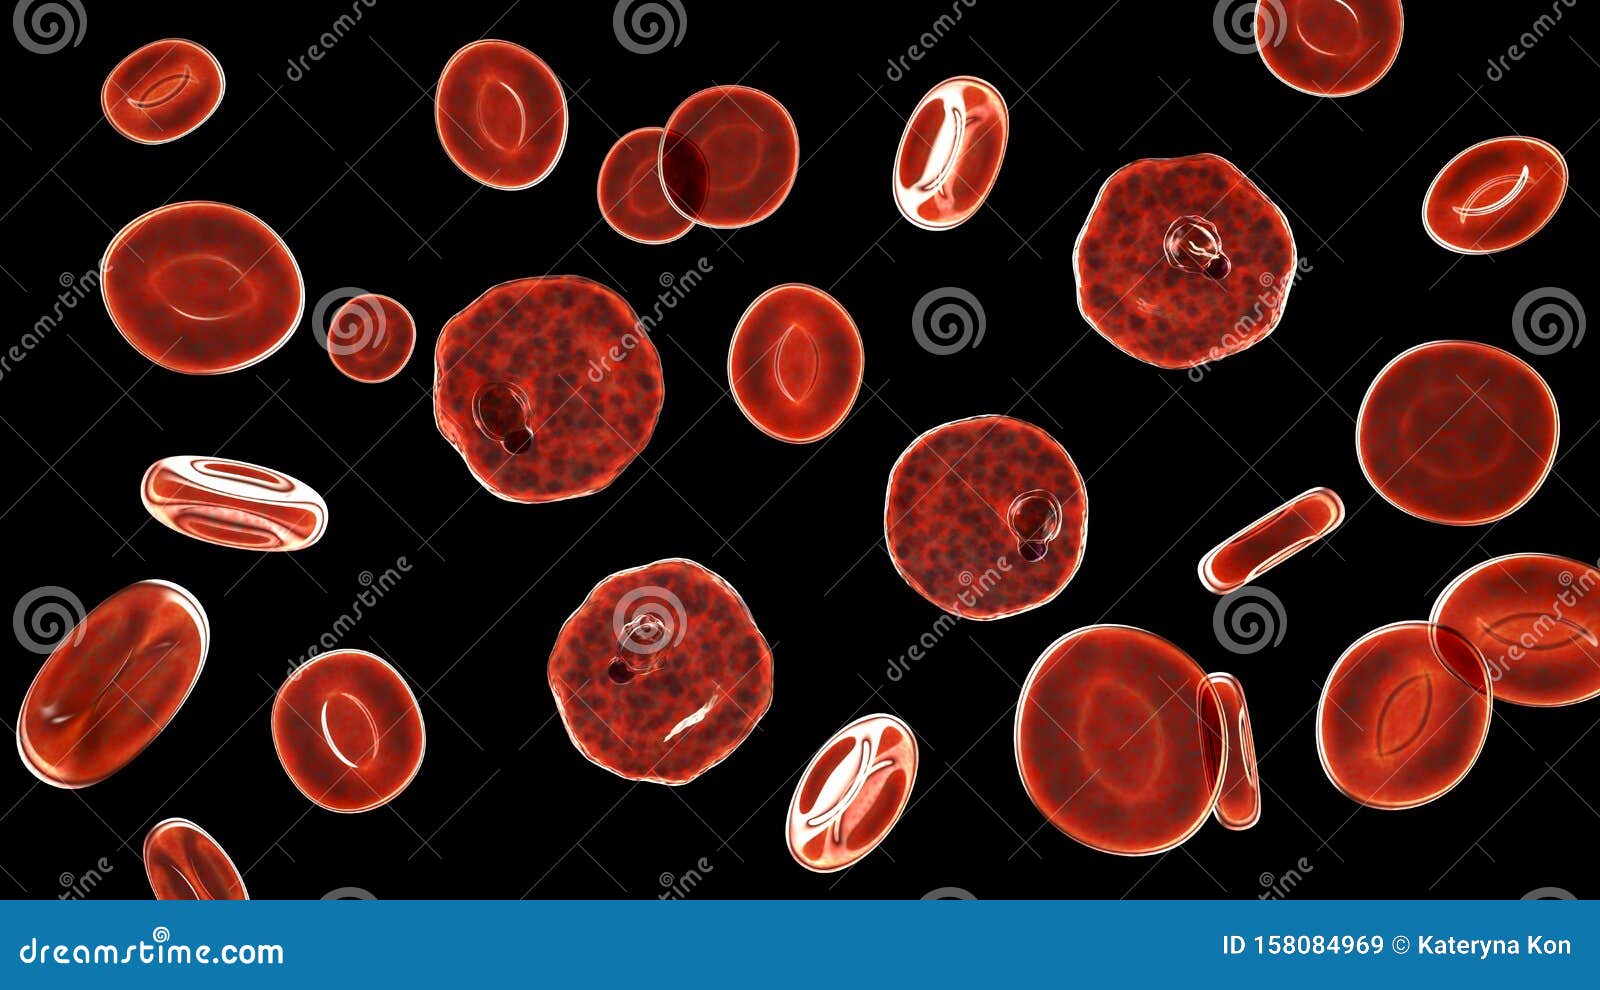 Red Blood Cells Infected With Malaria Parasite Plasmodium Vivax, Ring-form  Trophozoite Stage, 3D Illustration Stock Photo, Picture and Royalty Free  Image. Image 130794009.